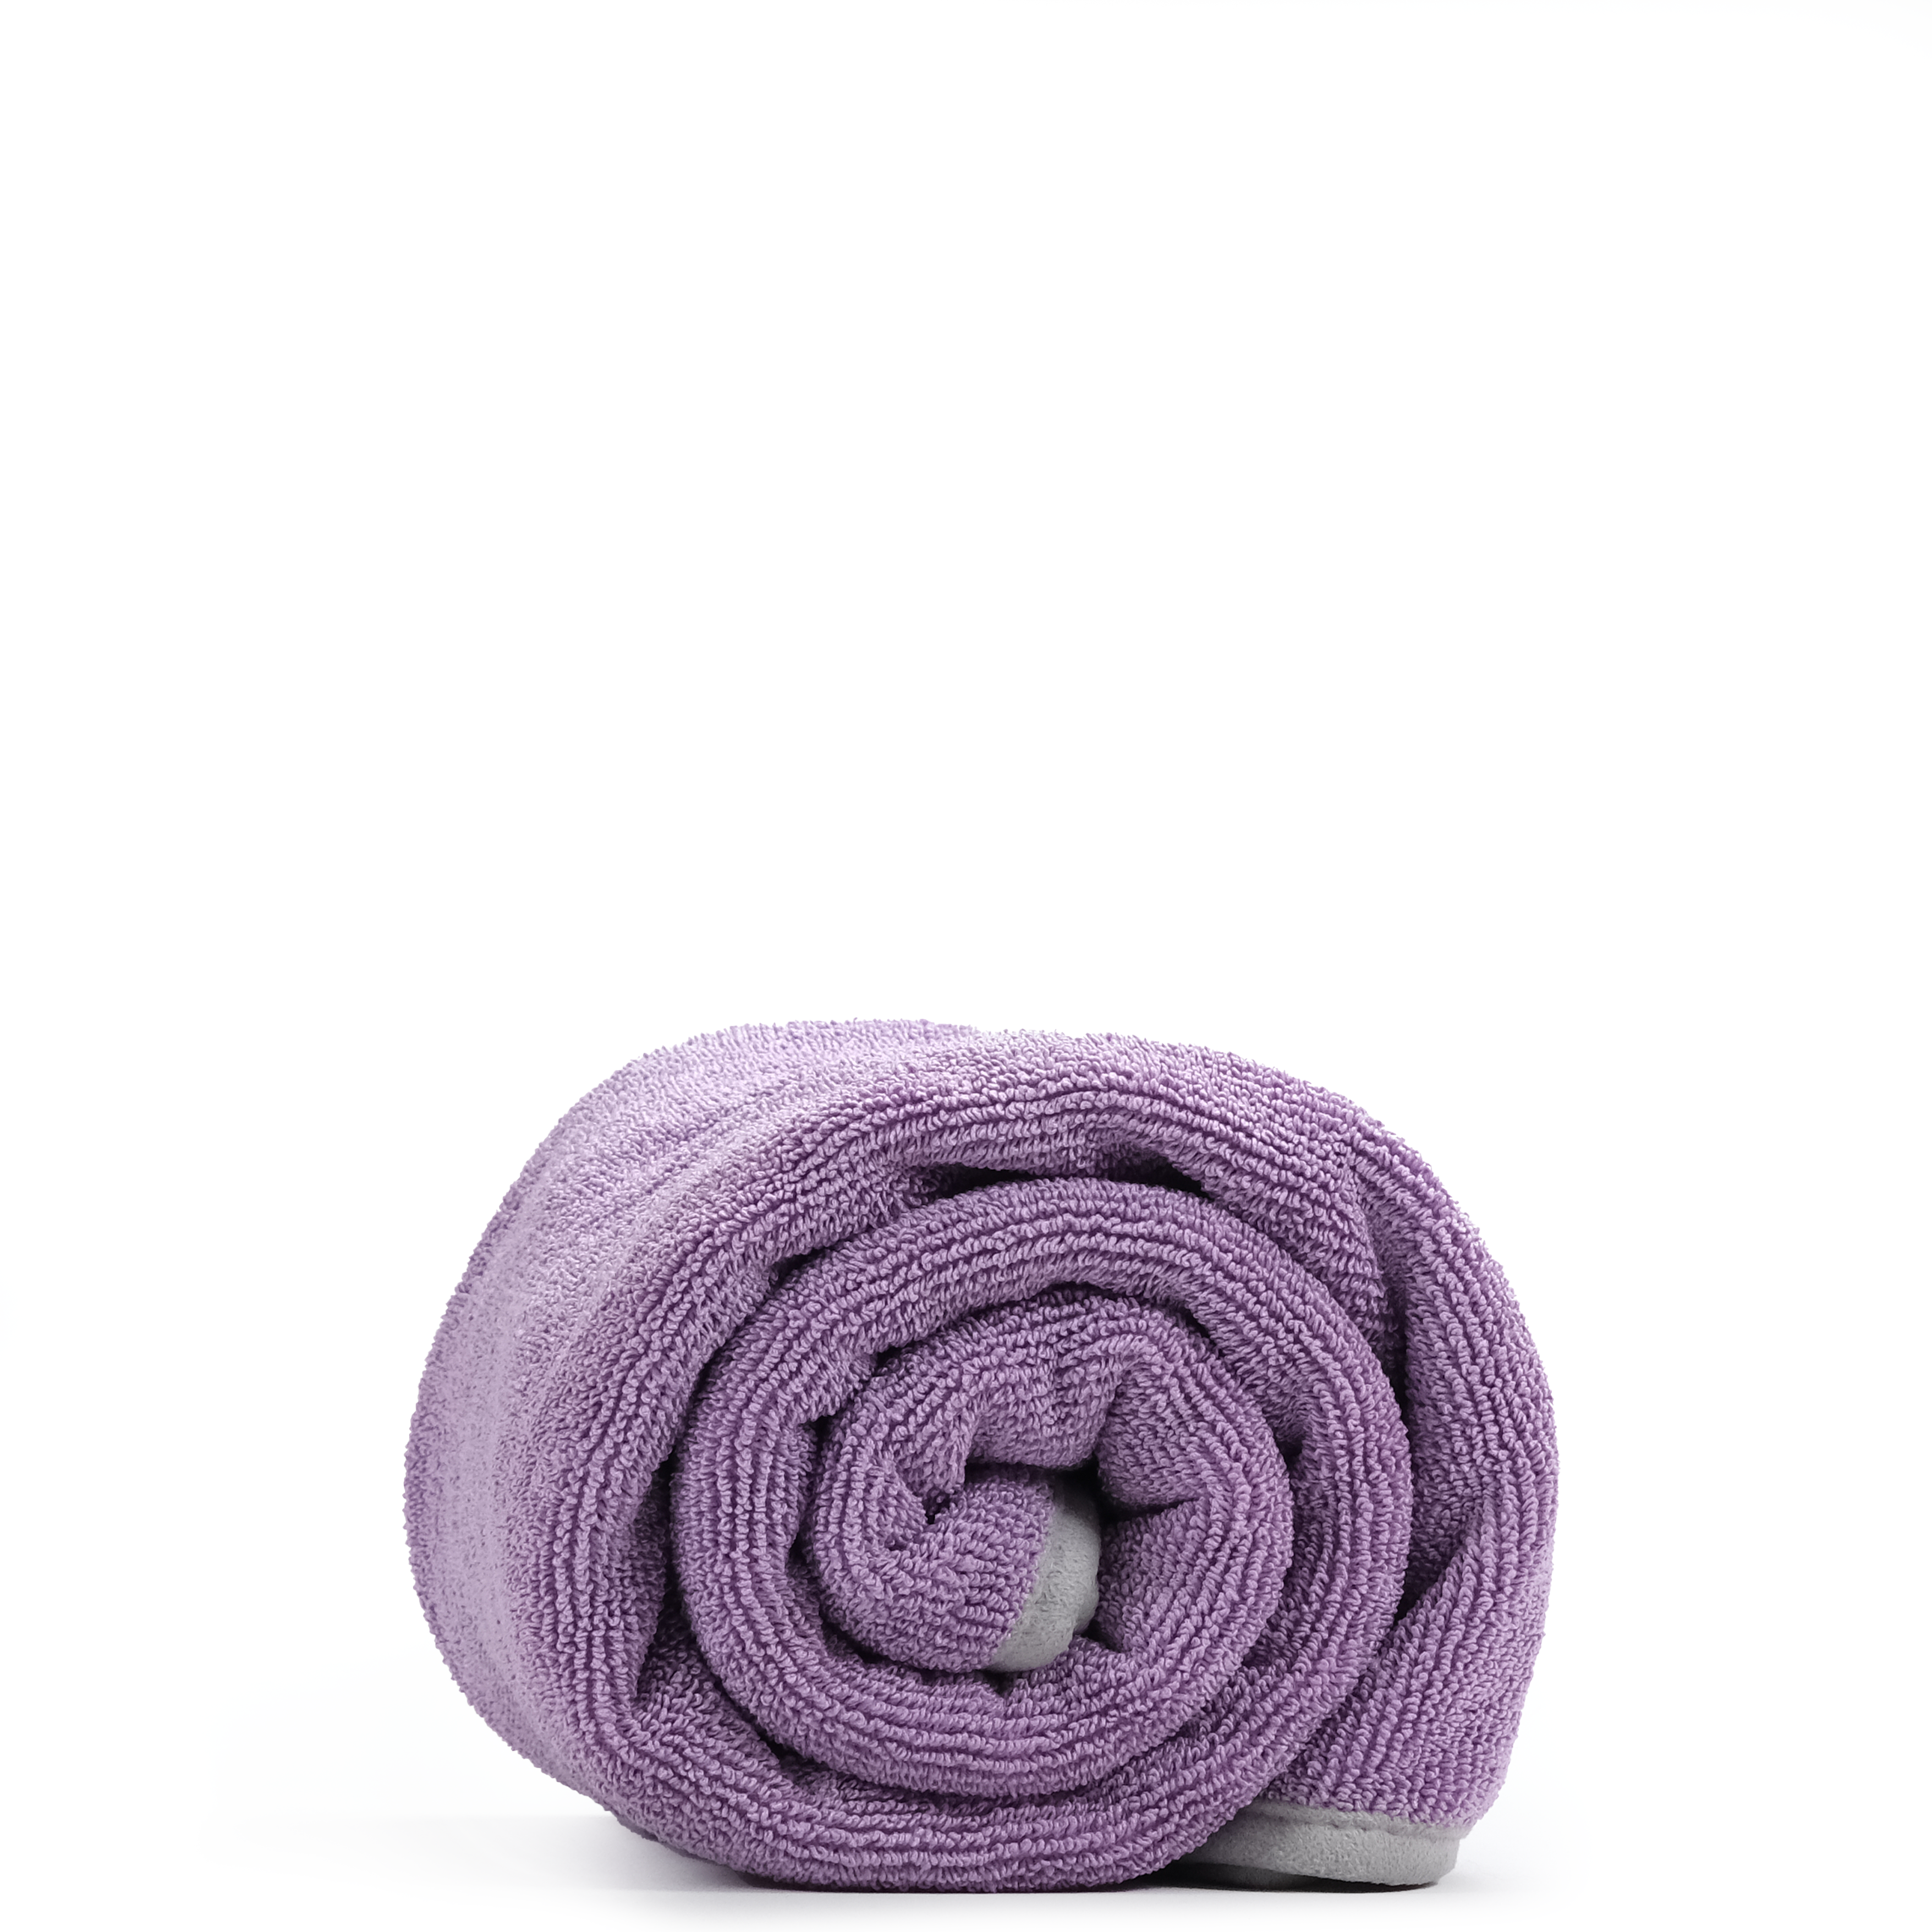 The Rag Company Twist N' Shout Drying Towel Lavender - 25 x 36 - Detailed  Image